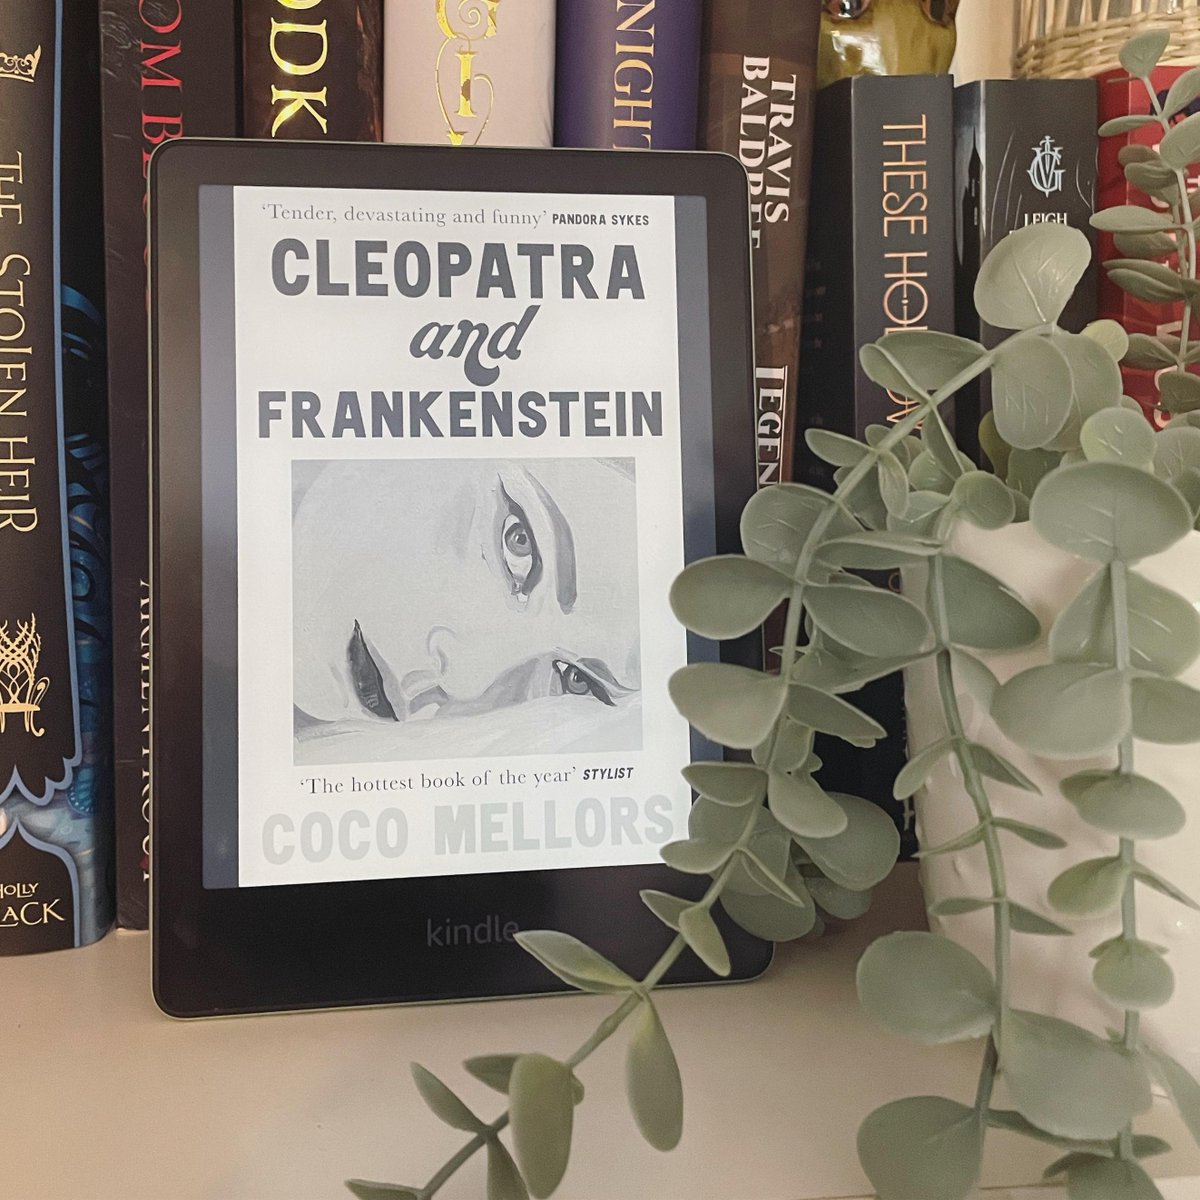 I really hate not finishing books, but I just couldn't finish #CleopatraandFrankenstein. It's not a book for me :/